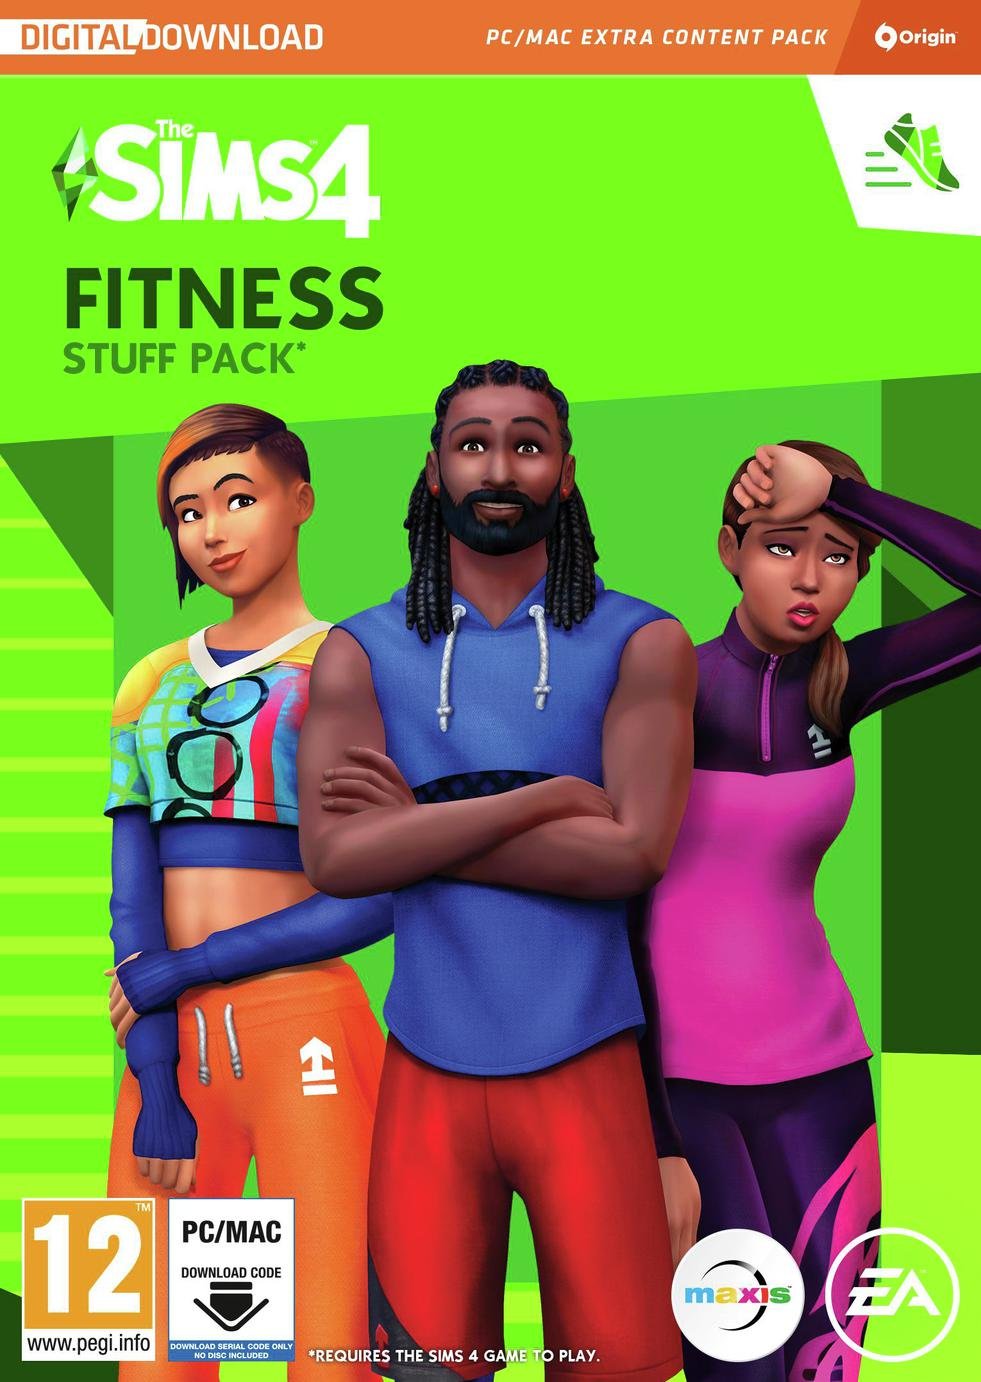 The Sims 4 Fitness Stuff Pack PC Game